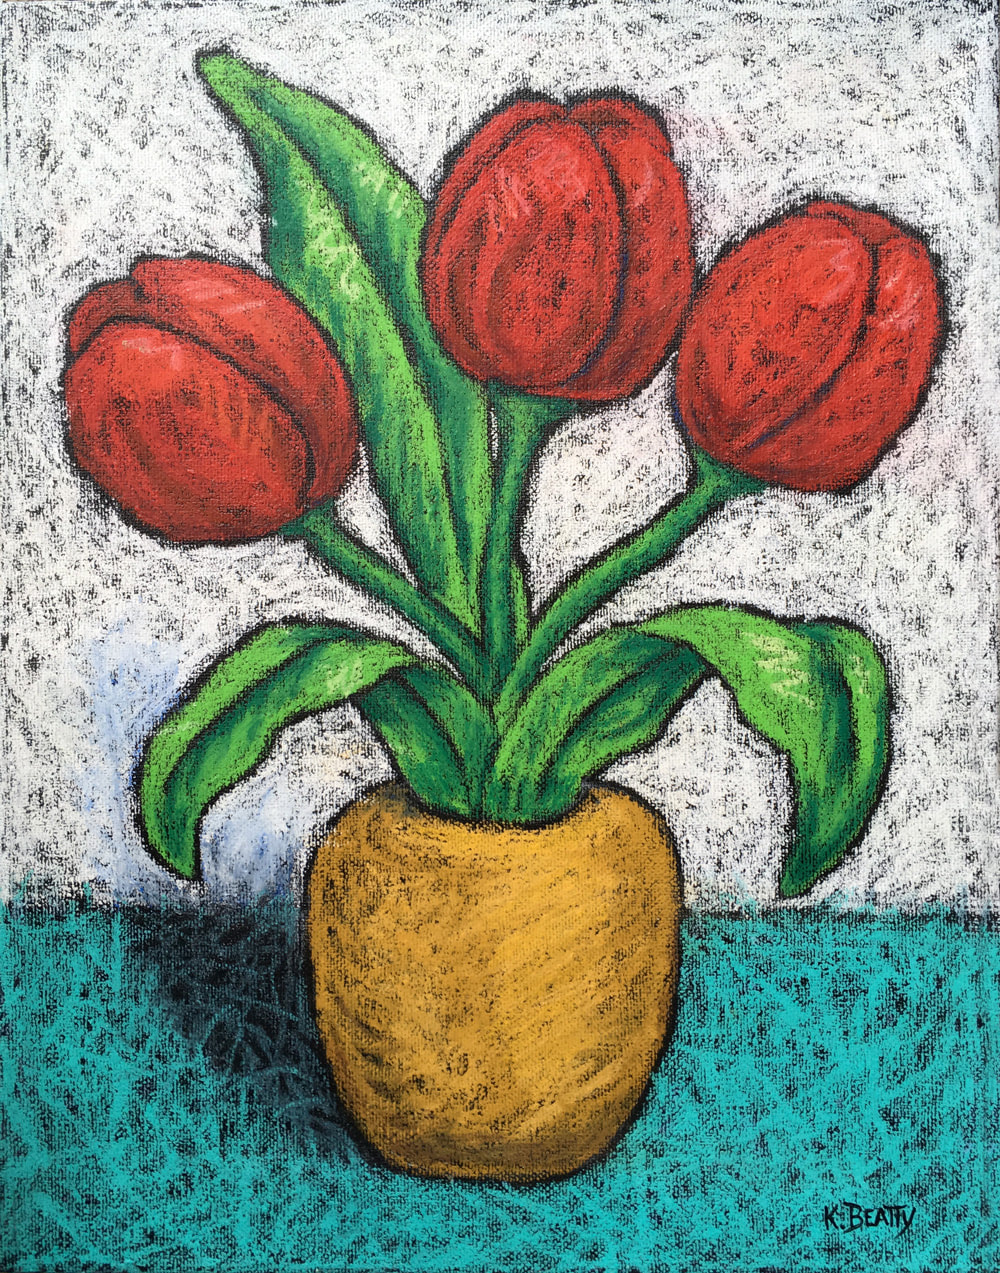 Red tulips pop out of a yellow vase in this oil pastel still life.